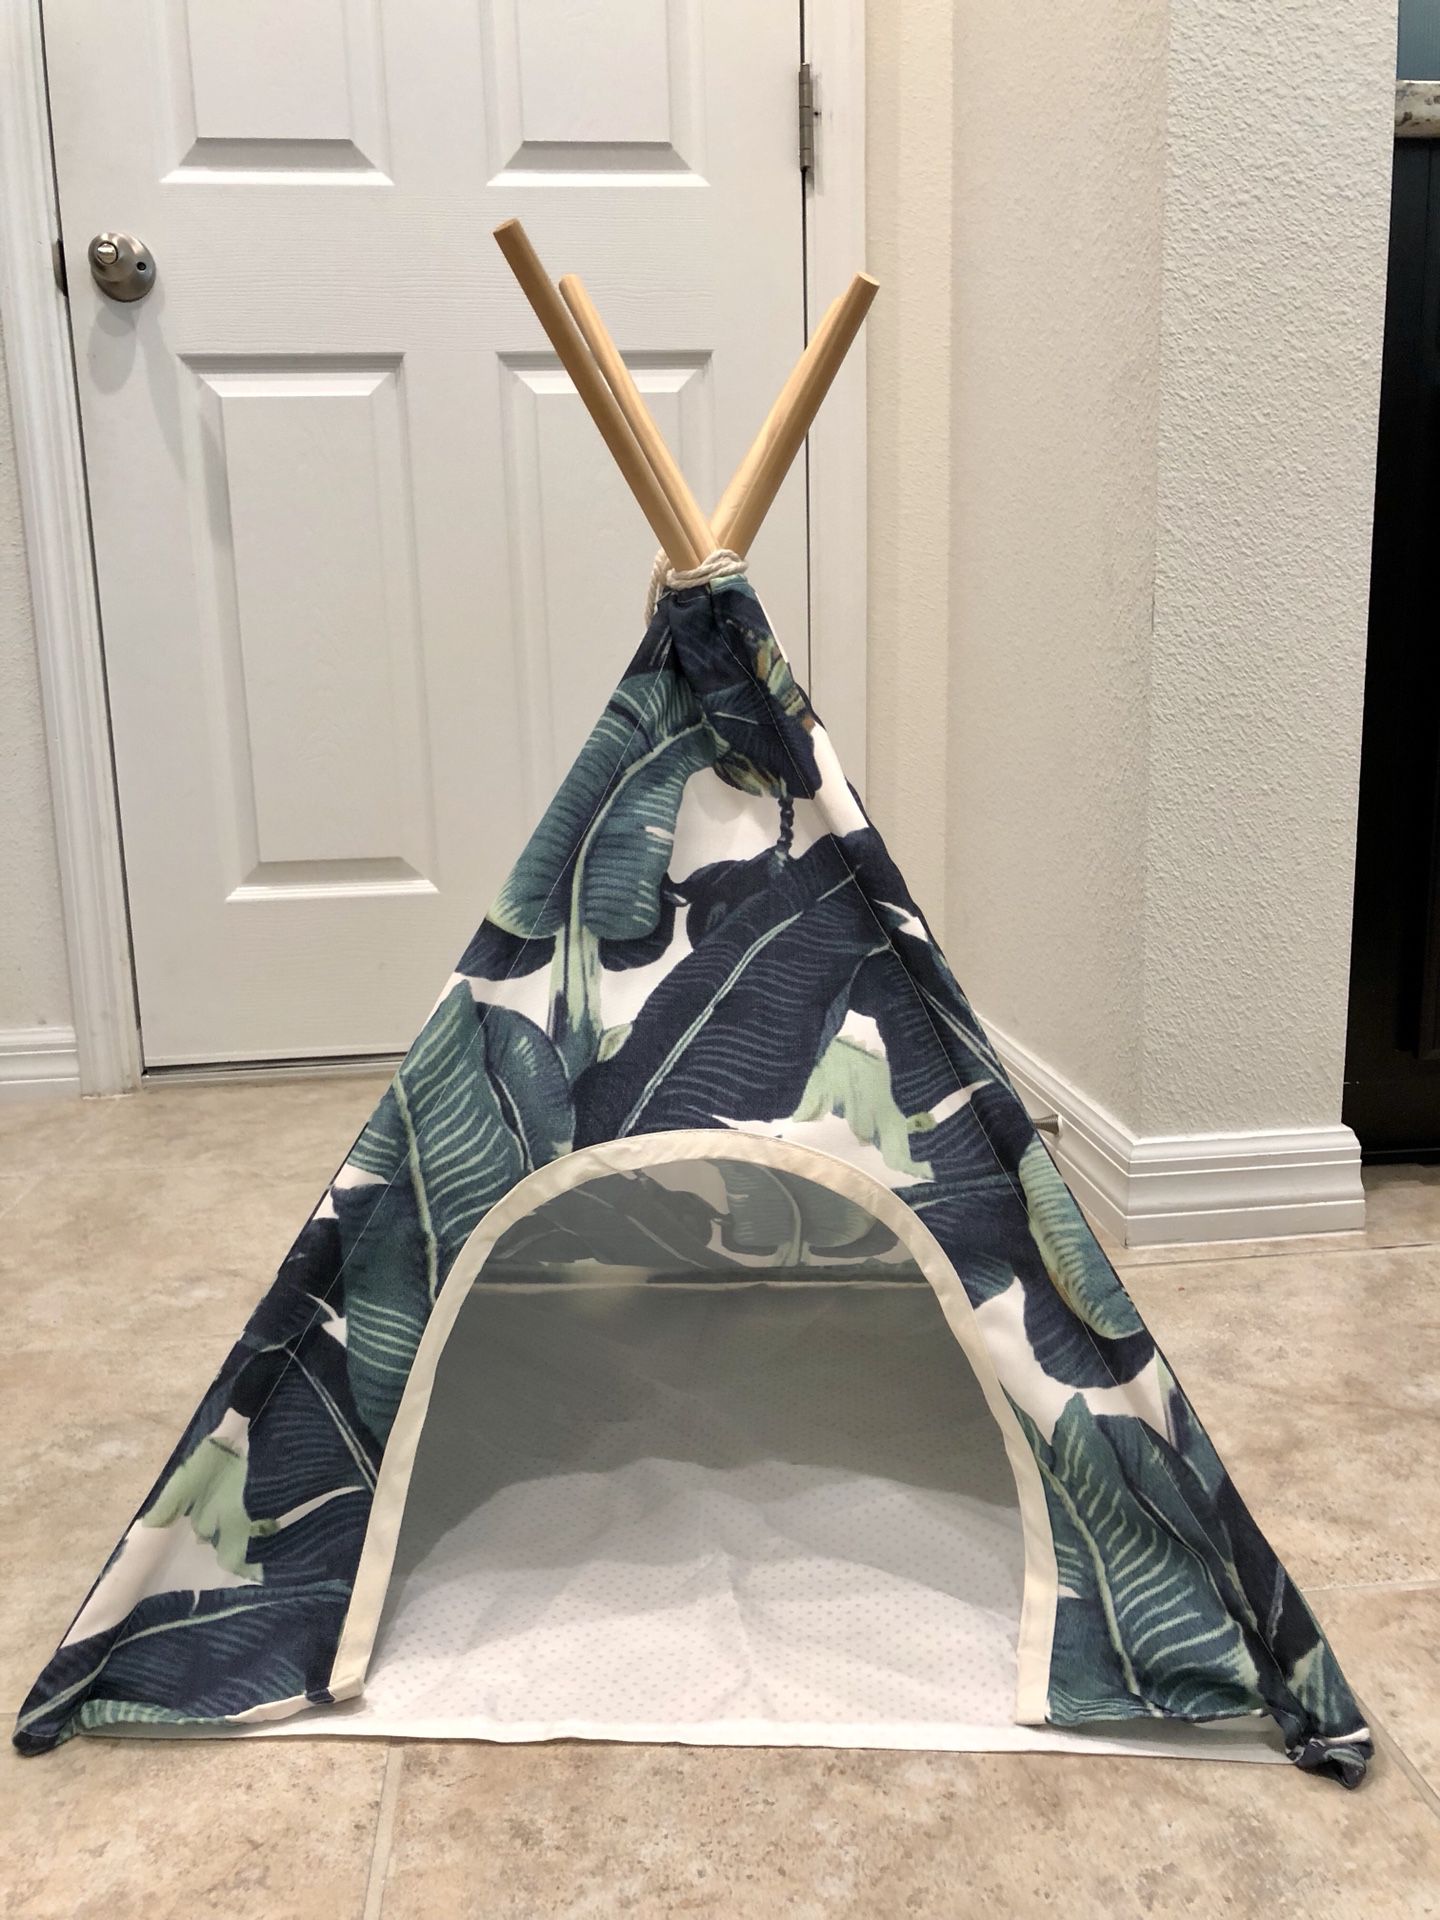 Pet Teepee Dog(Puppy) & Cat Bed